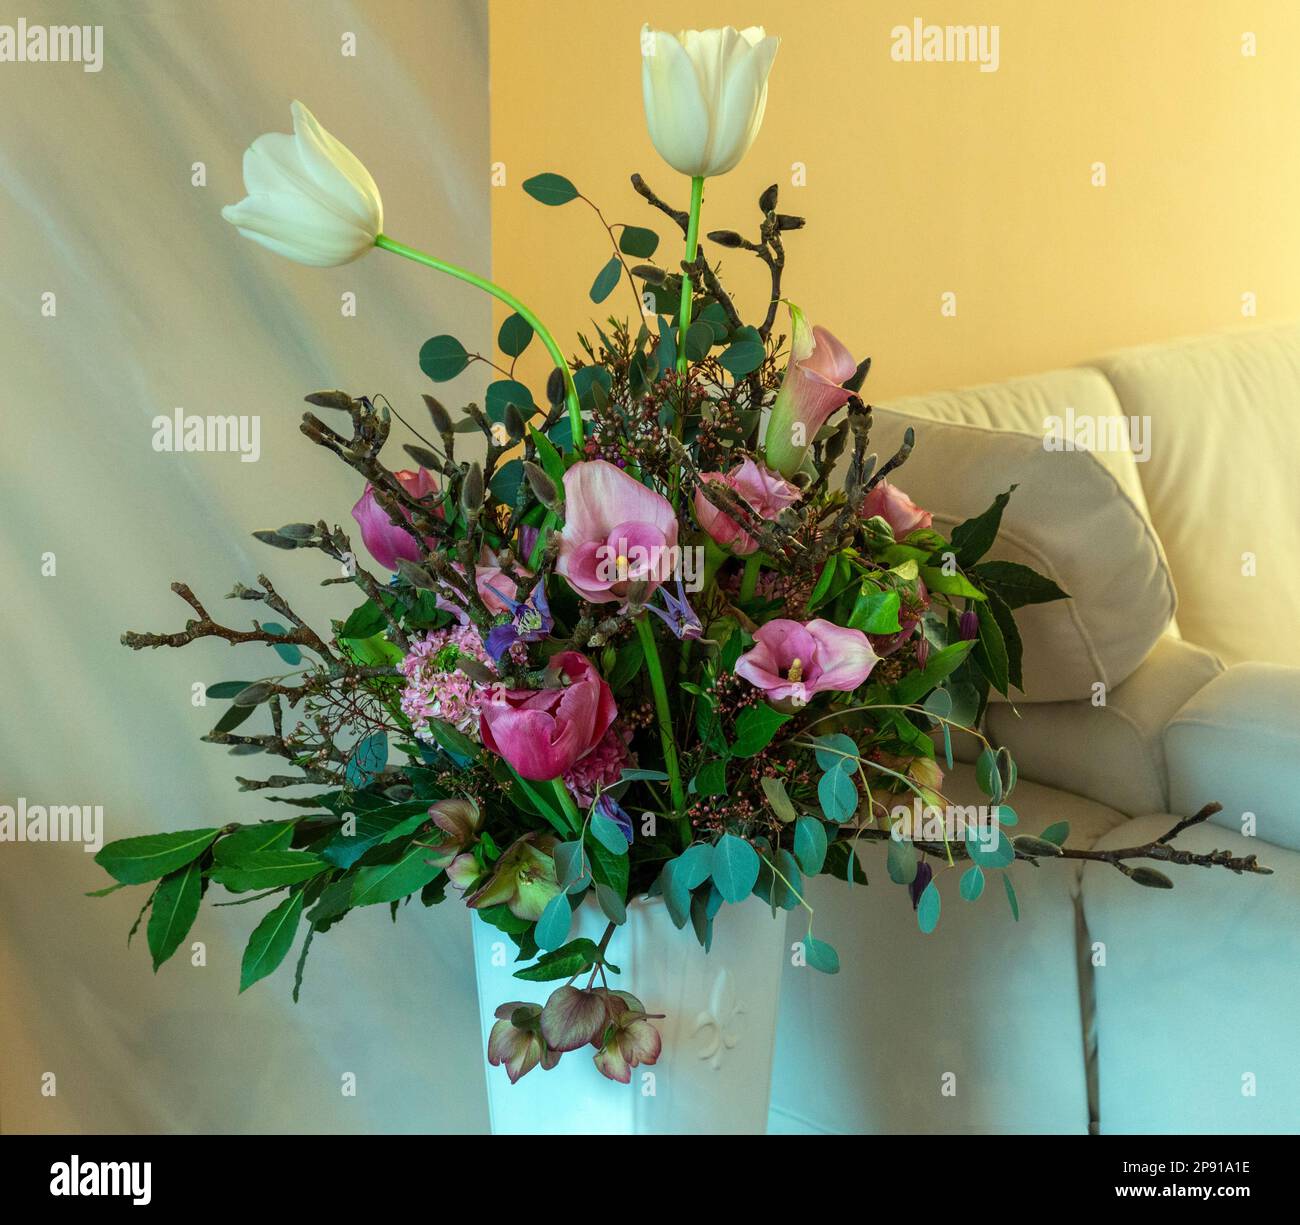 nature, plants, flowers, bunch of flowers, birthday bouquet in a flower vase, tulips, clematis, roses, calla, lenten rose, Anemone, Magnolia twigs Stock Photo